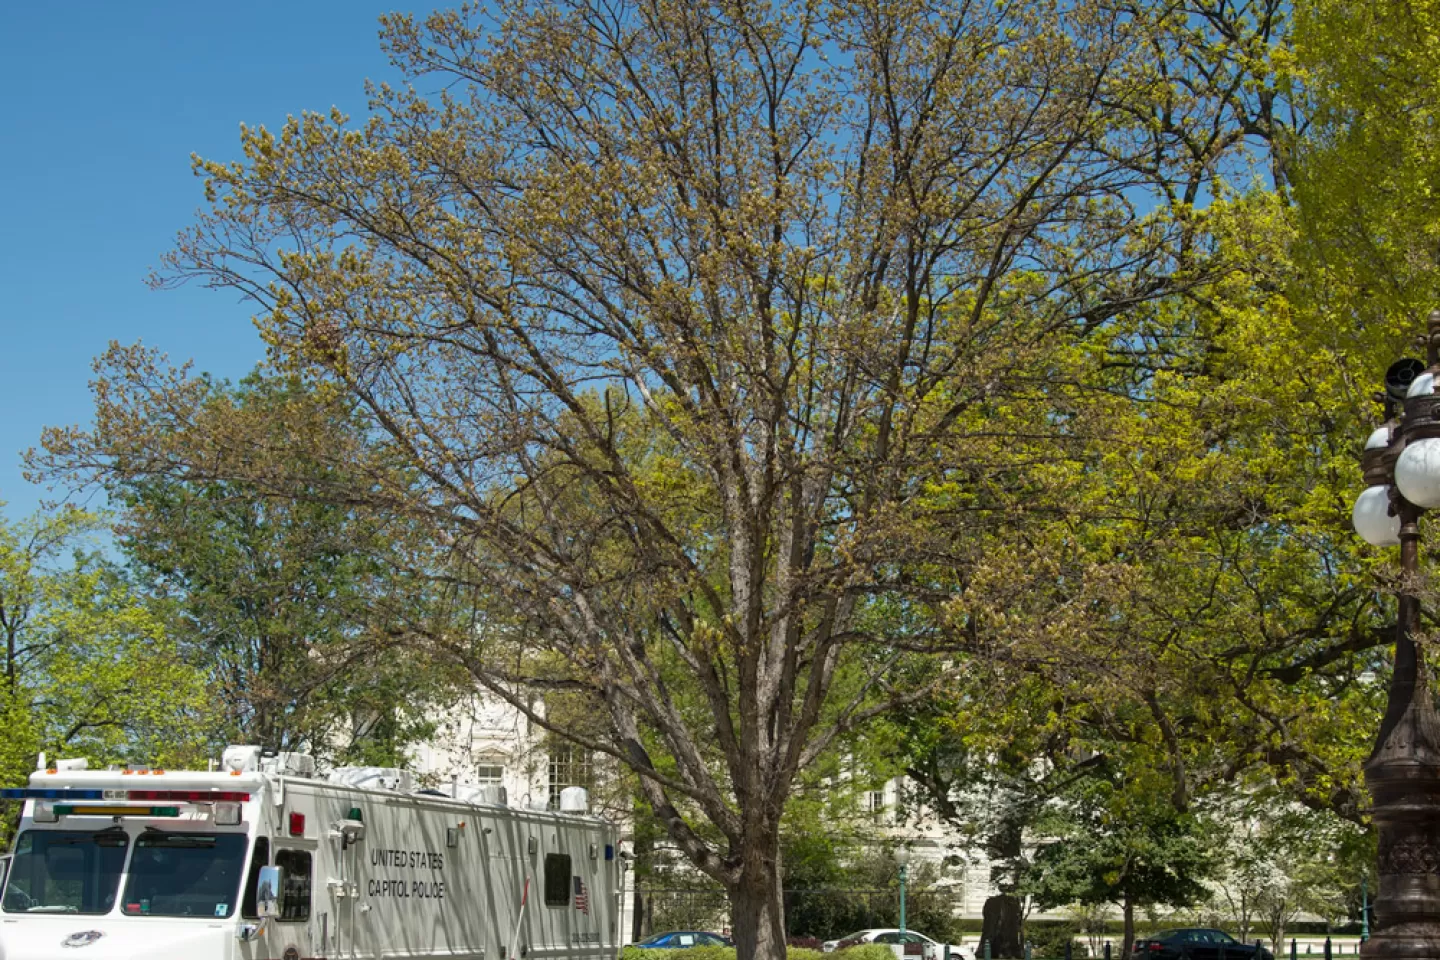 Tree for the state of Maryland on the U.S. Capitol Grounds during spring.